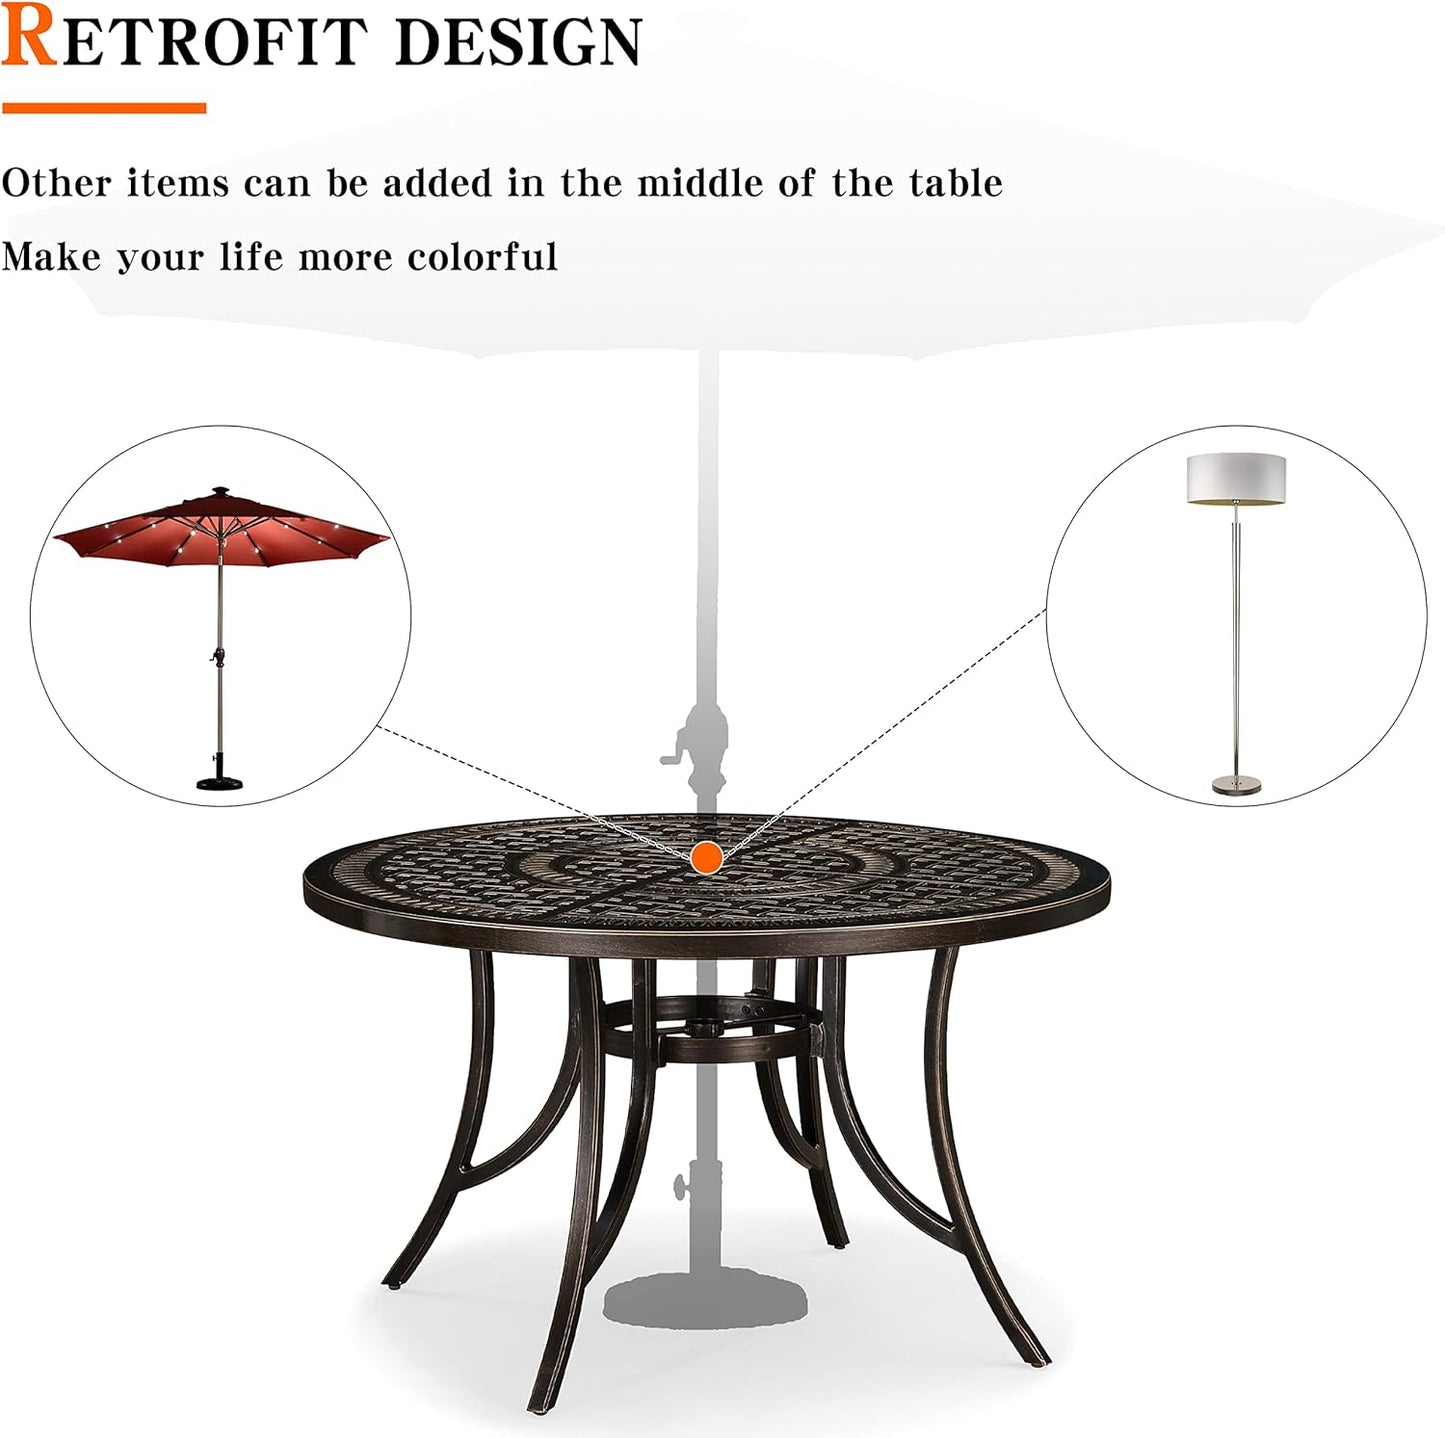 PURPLE LEAF 47" Outdoor Cast Aluminum Round Dining Table with Umbrella Hole Patio Furniture for Backyard Lawn Balcony Deck, Patio Dining Table, Lattice